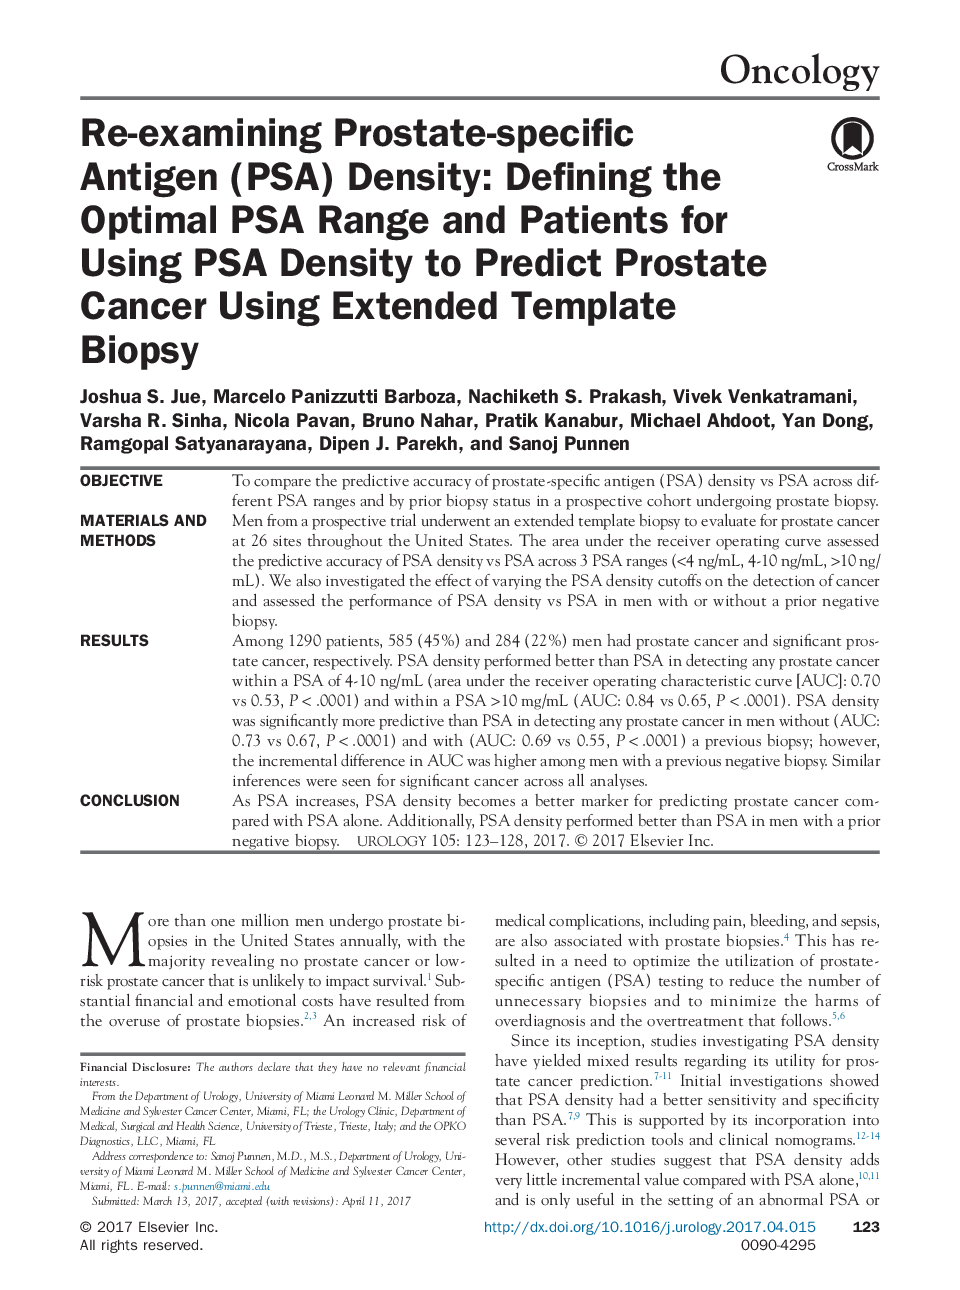 Re-examining Prostate-specific Antigen (PSA) Density: Defining the Optimal PSA Range and Patients for Using PSA Density to Predict Prostate Cancer Using Extended Template Biopsy